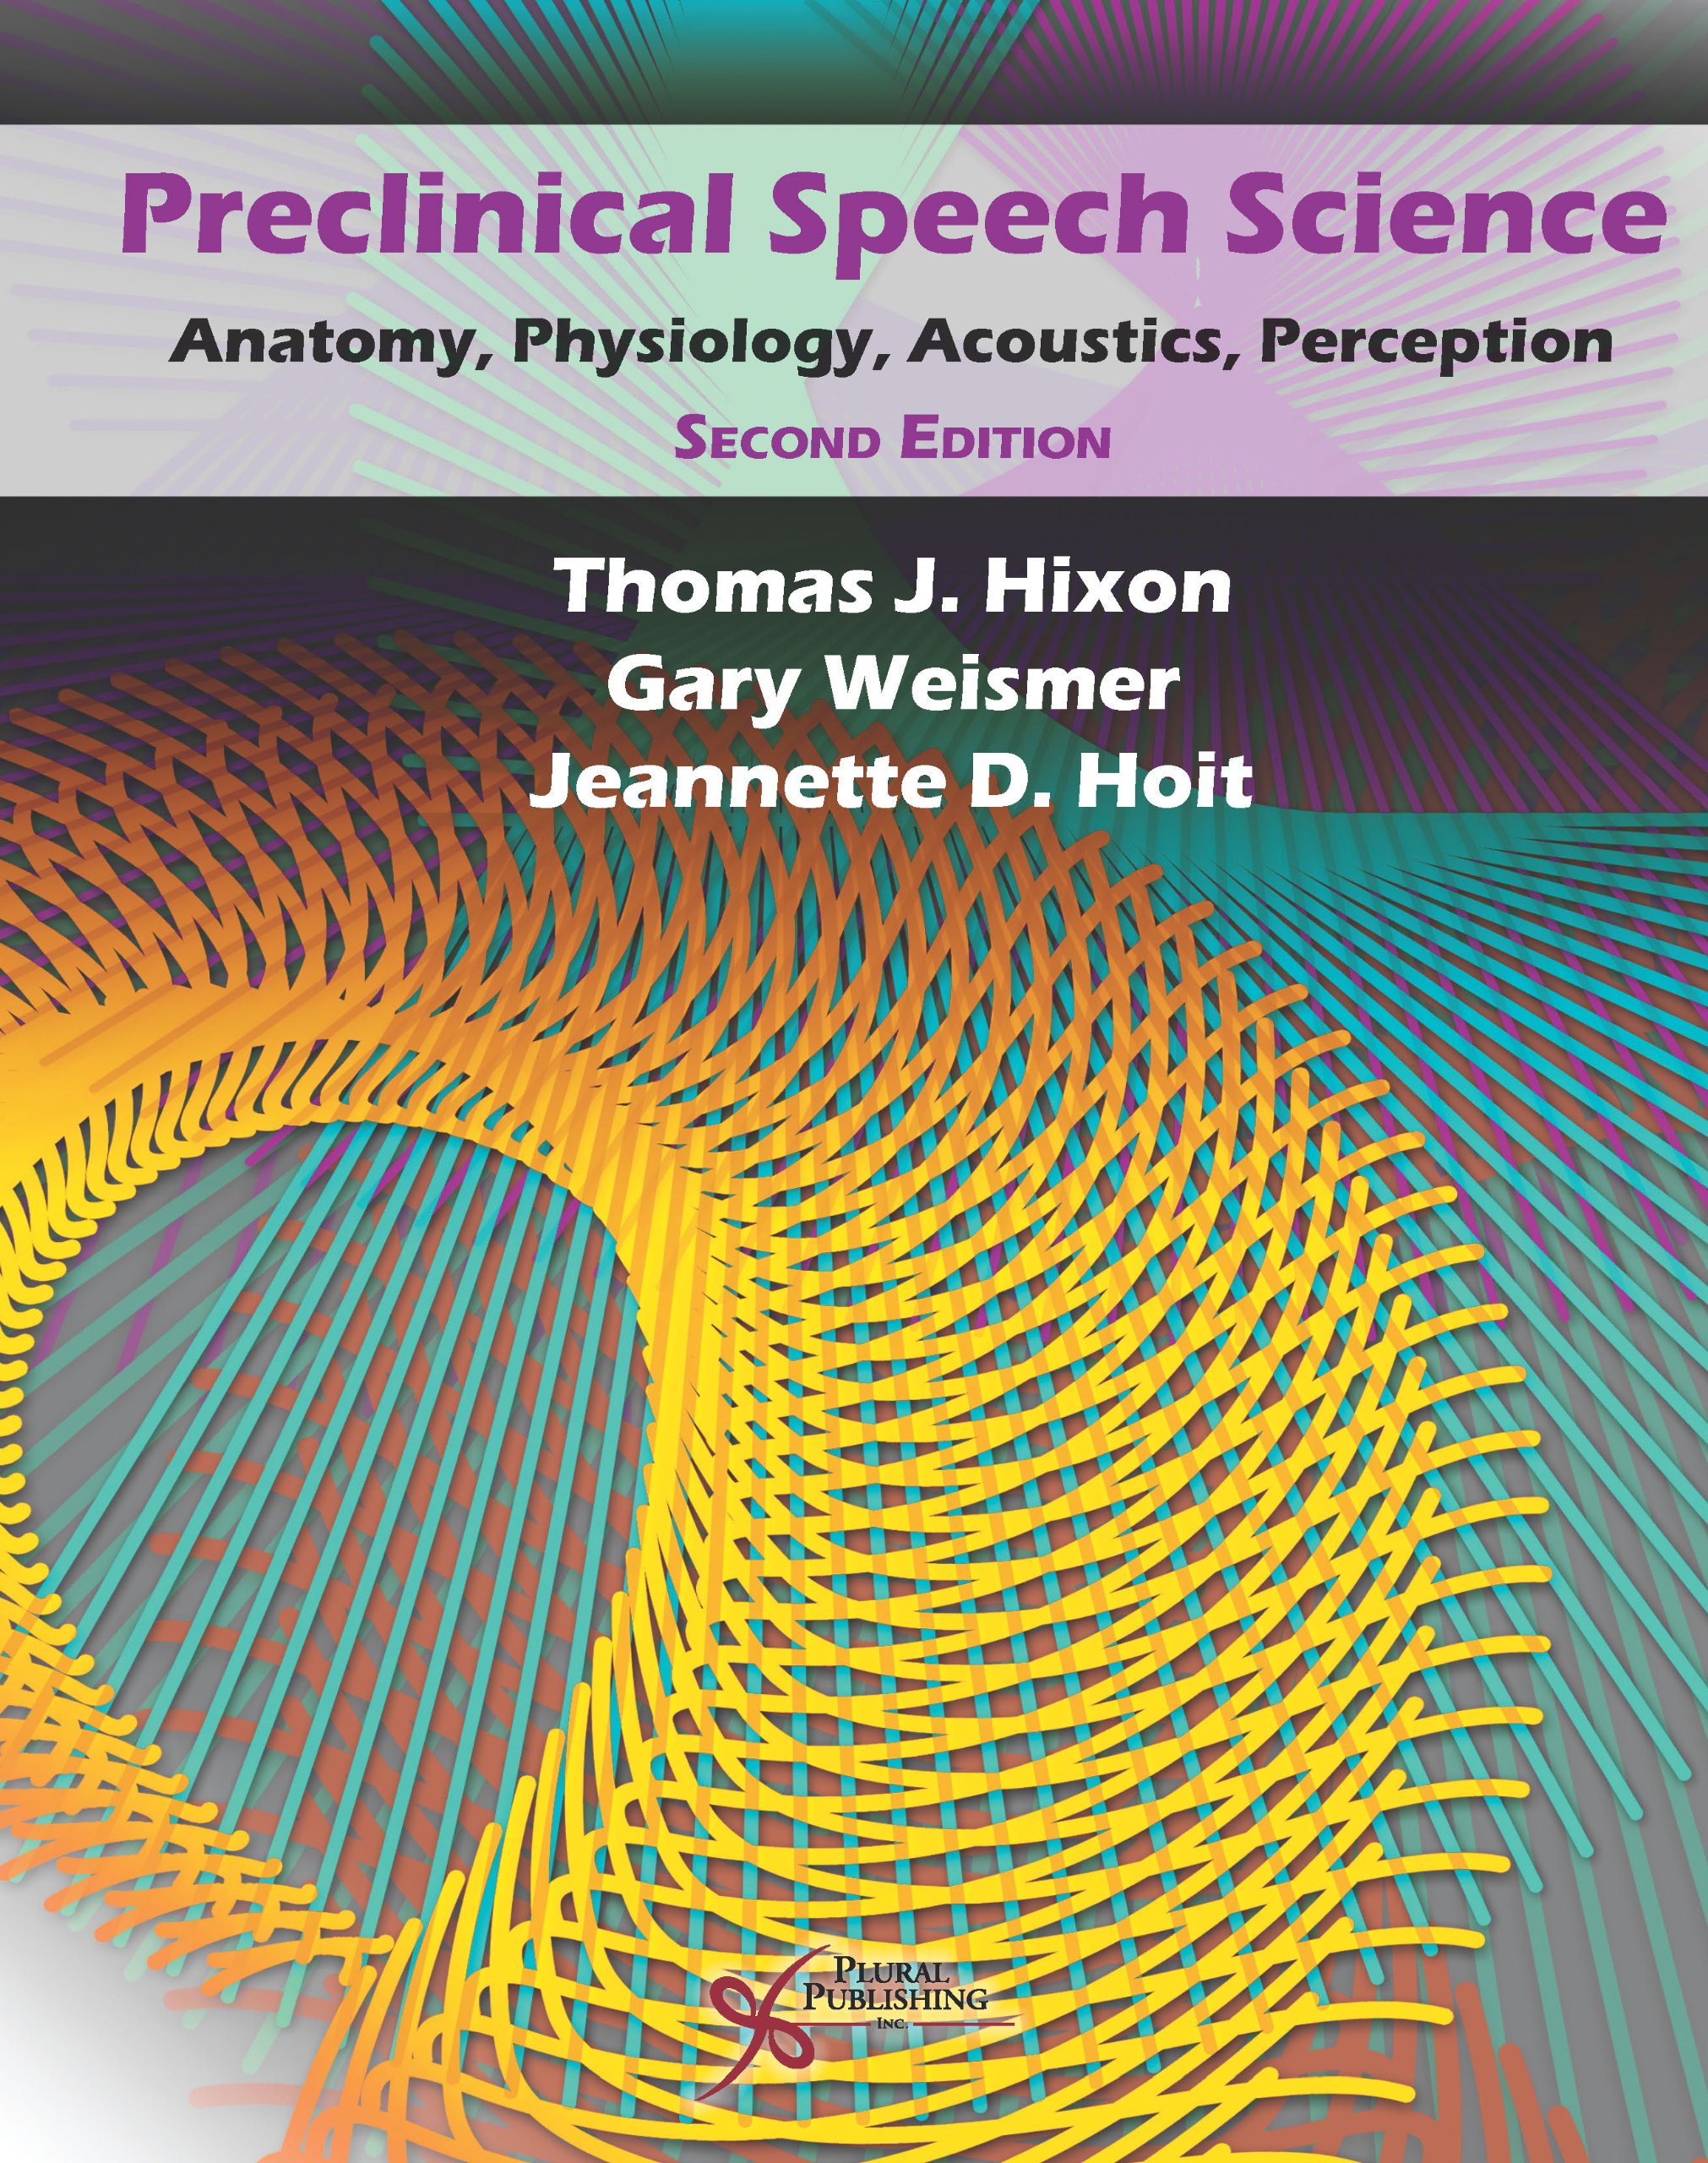 Preclinical Speech Science: Anatomy, Physiology, Acoustics, and Perception, Second Edition